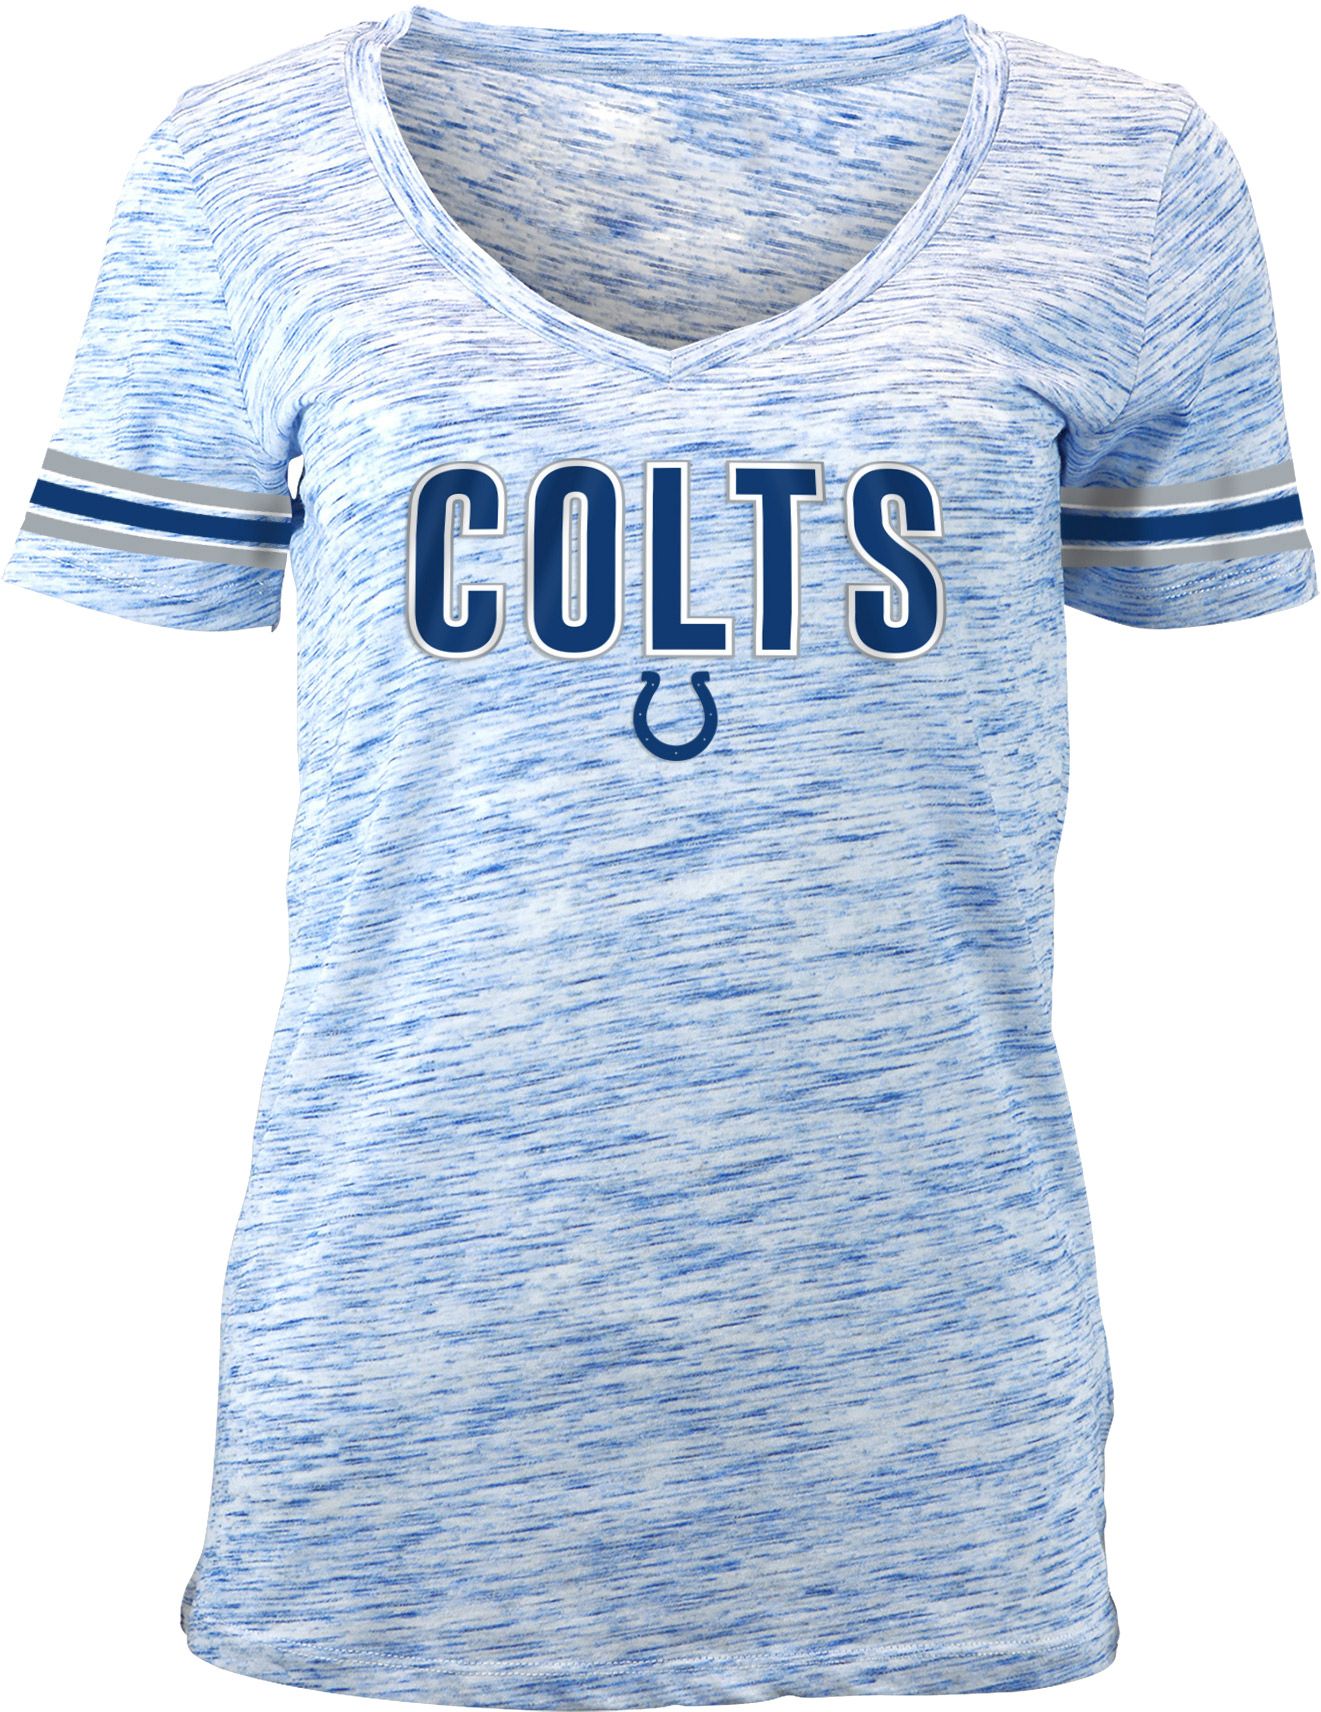 Indianapolis Colts Apparel & Gear  In-Store Pickup Available at DICK'S